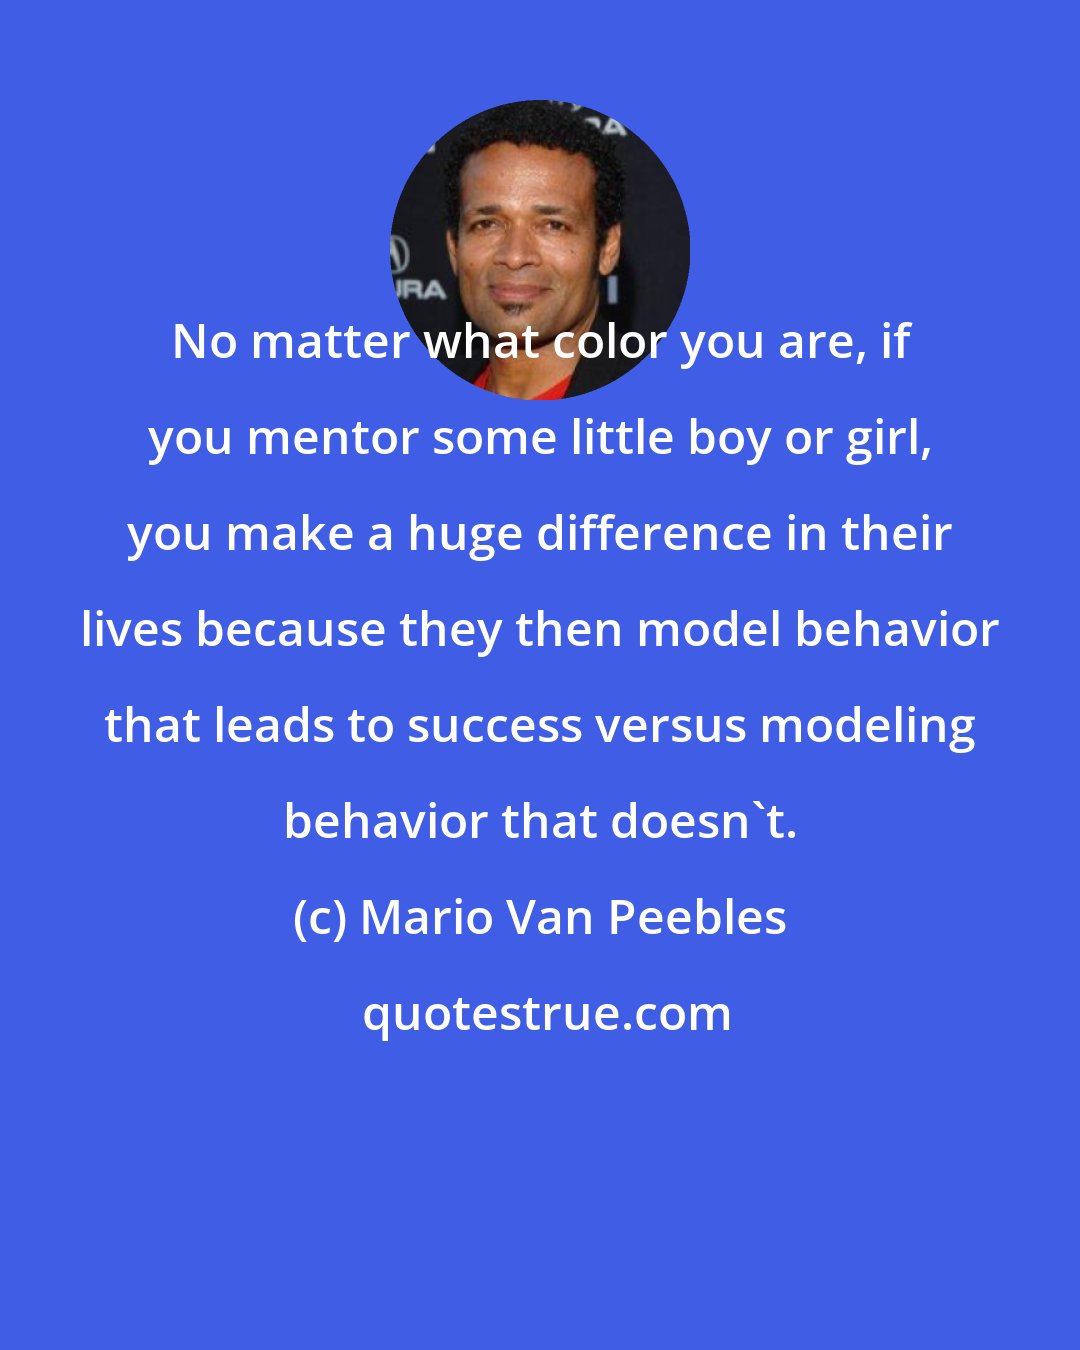 Mario Van Peebles: No matter what color you are, if you mentor some little boy or girl, you make a huge difference in their lives because they then model behavior that leads to success versus modeling behavior that doesn't.